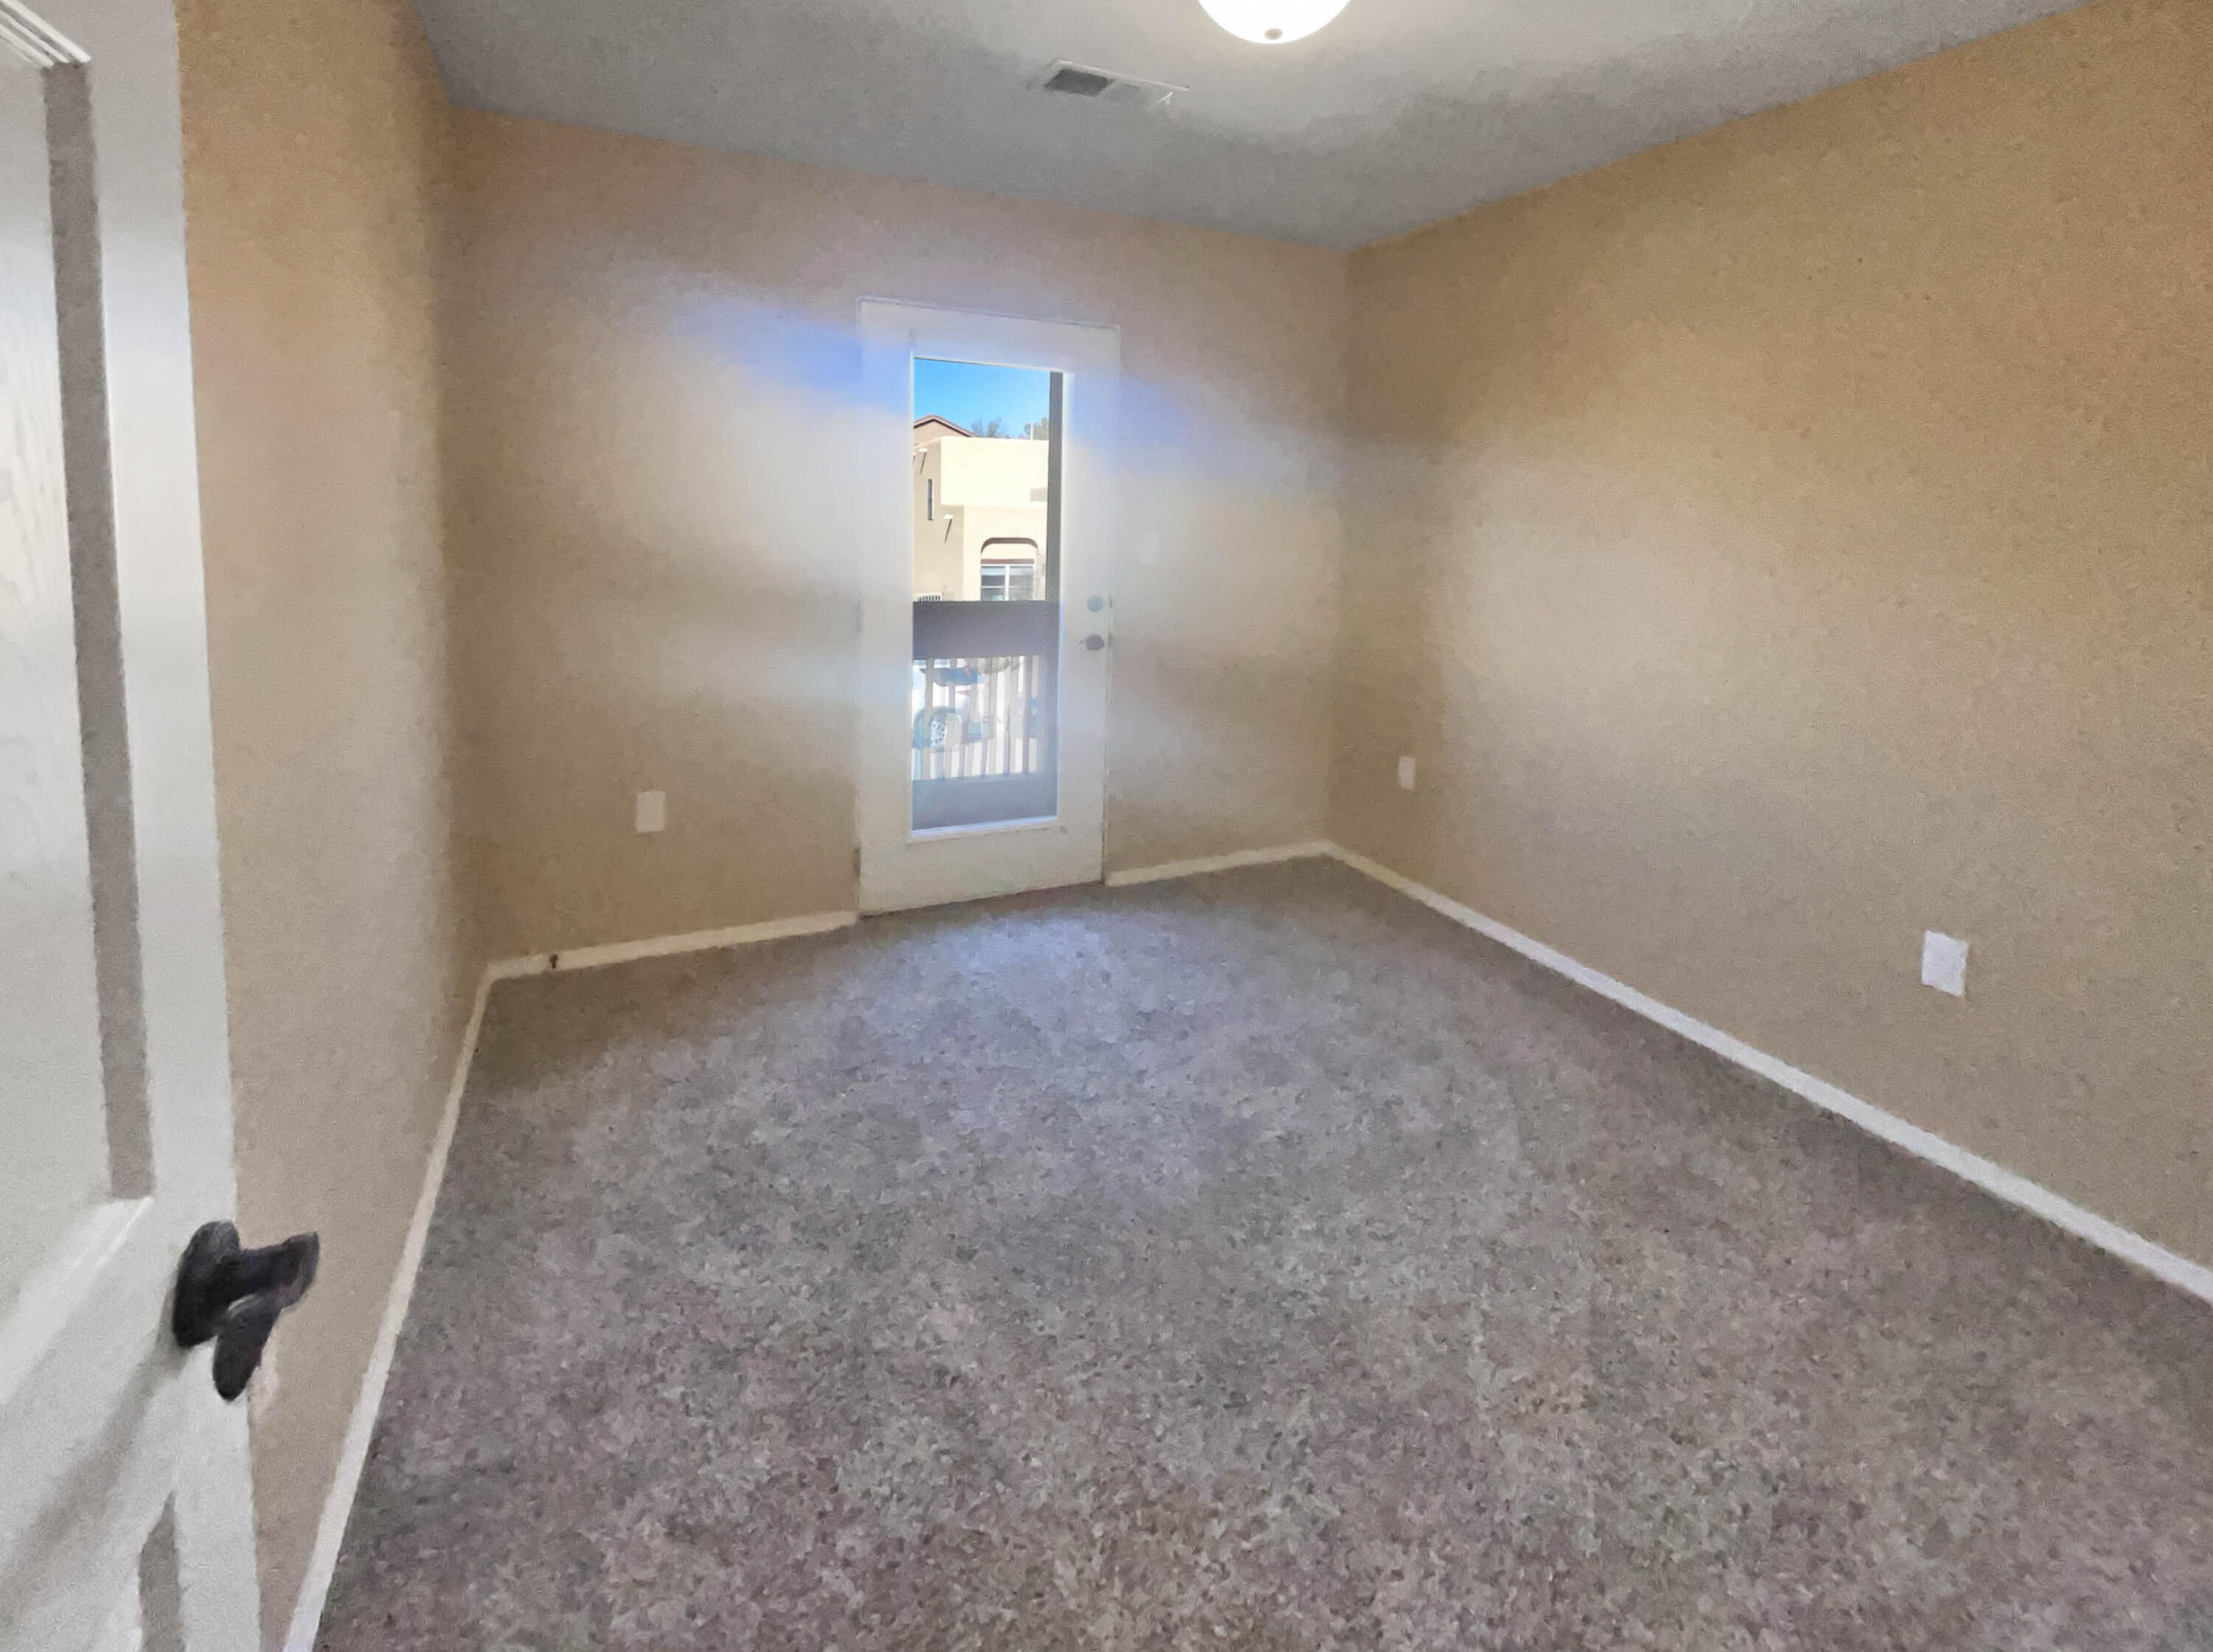 820 Tumulus Drive NW, Albuquerque, New Mexico 87120, 5 Bedrooms Bedrooms, ,4 BathroomsBathrooms,Residential,For Sale,820 Tumulus Drive NW,1060579